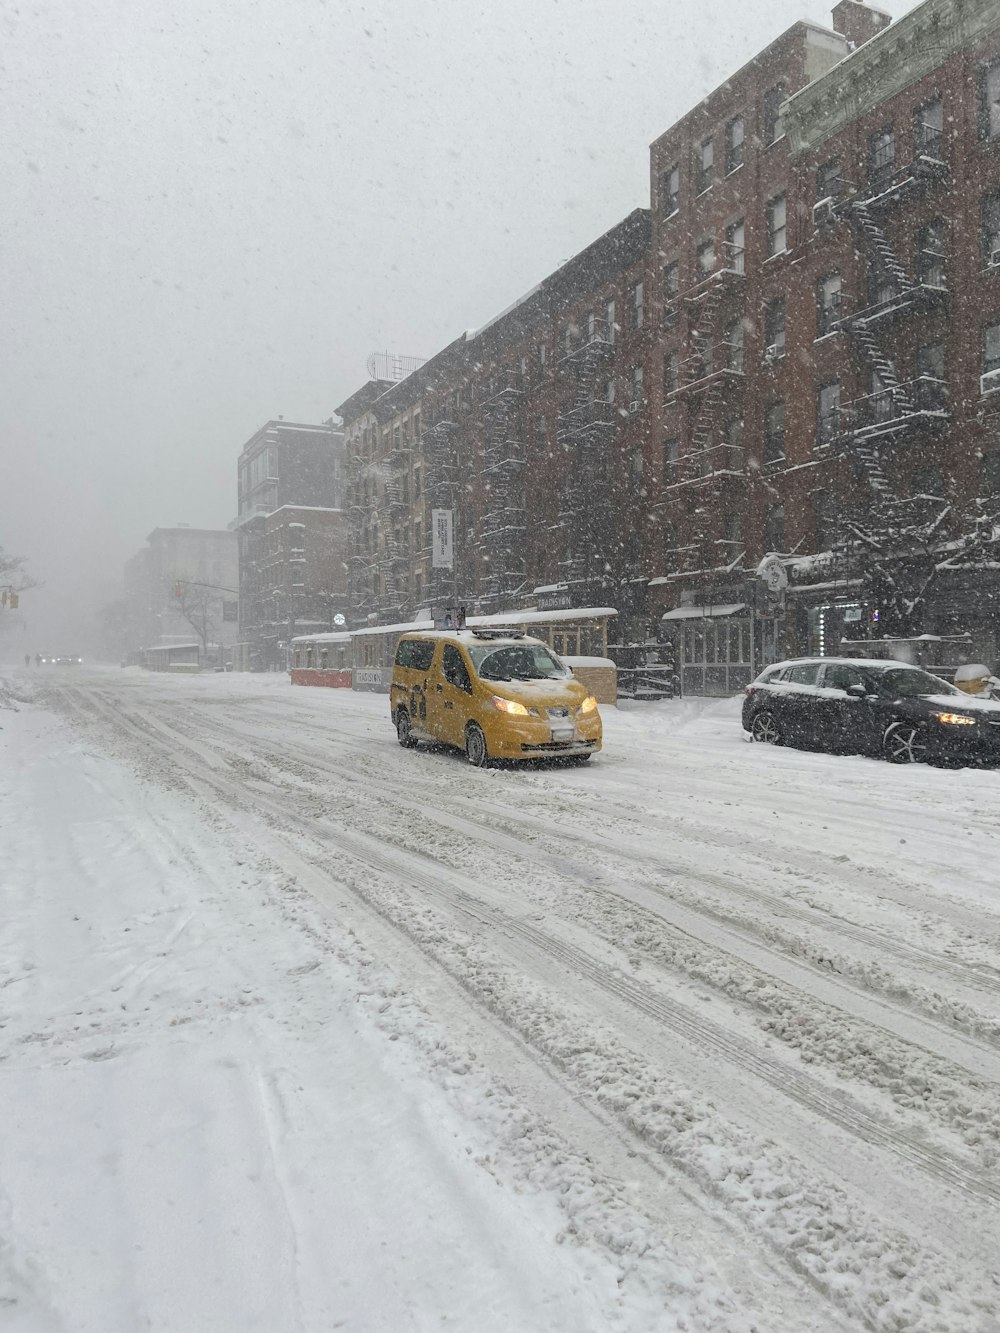 yellow taxi cab on snow covered road near brown concrete building during daytime